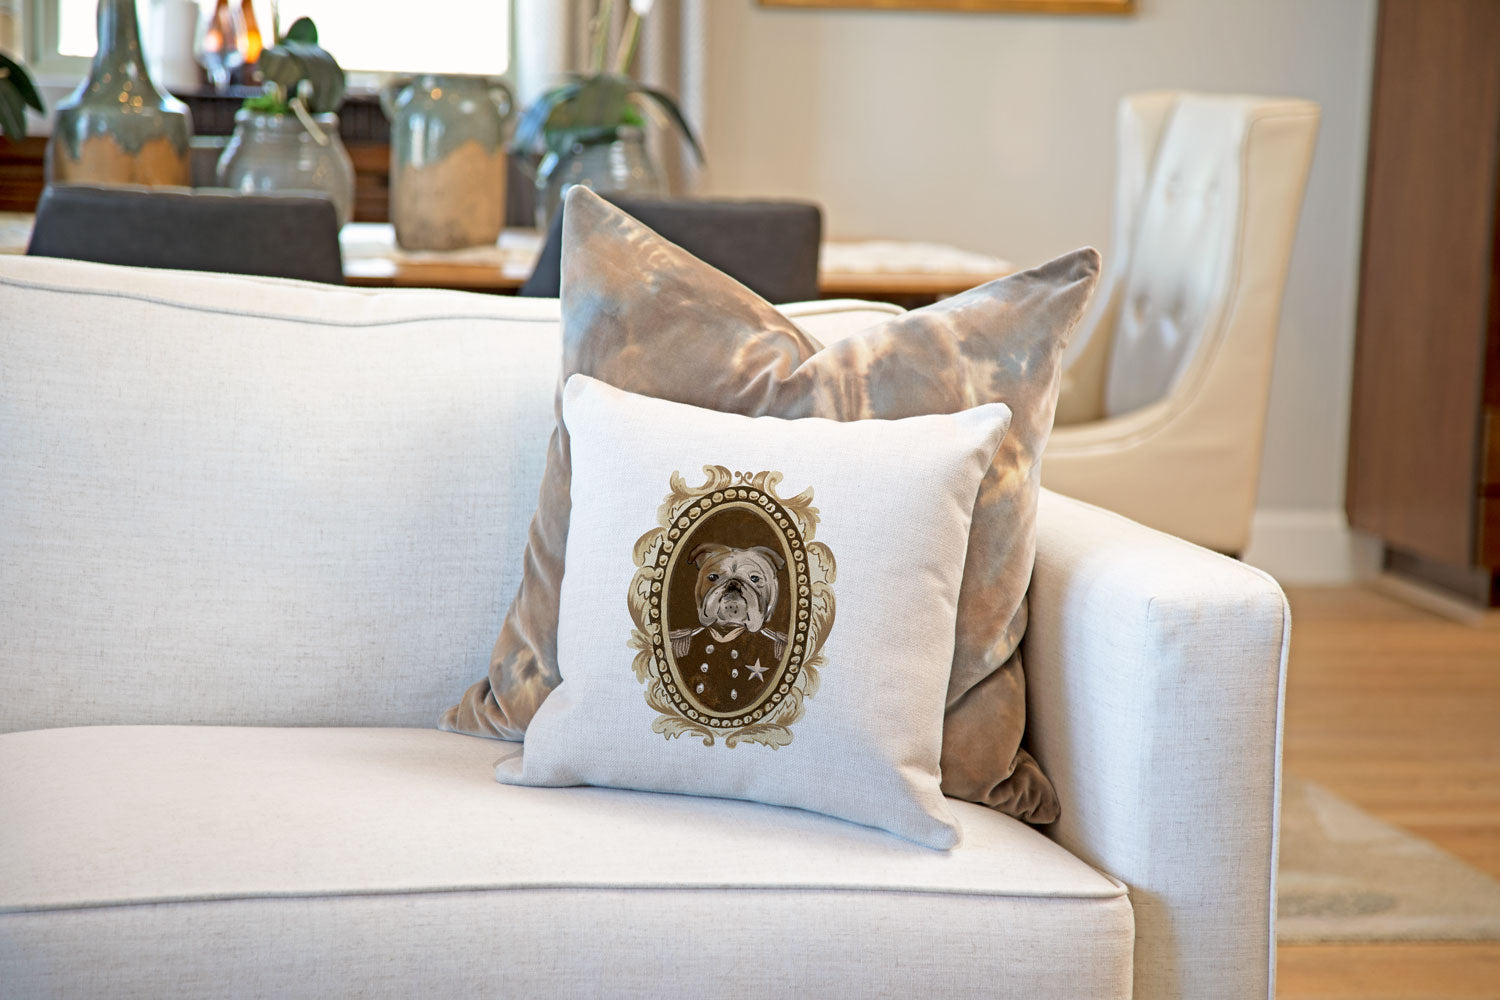 Sergeant Bulldog Throw Pillow Cover - Dog Illustration Throw Pillow Cover Collection-Di Lewis